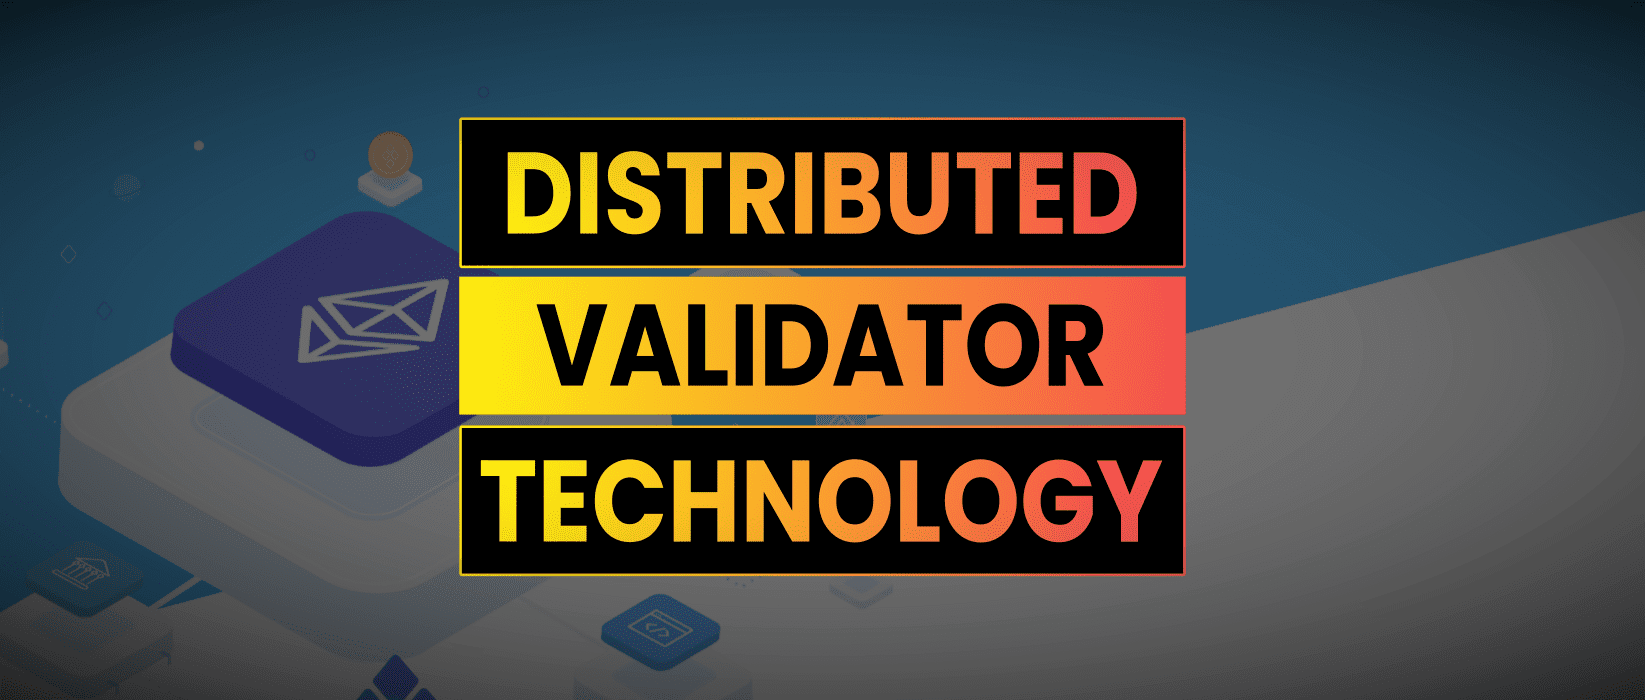 What is DVT? | Distributed Validator Technology